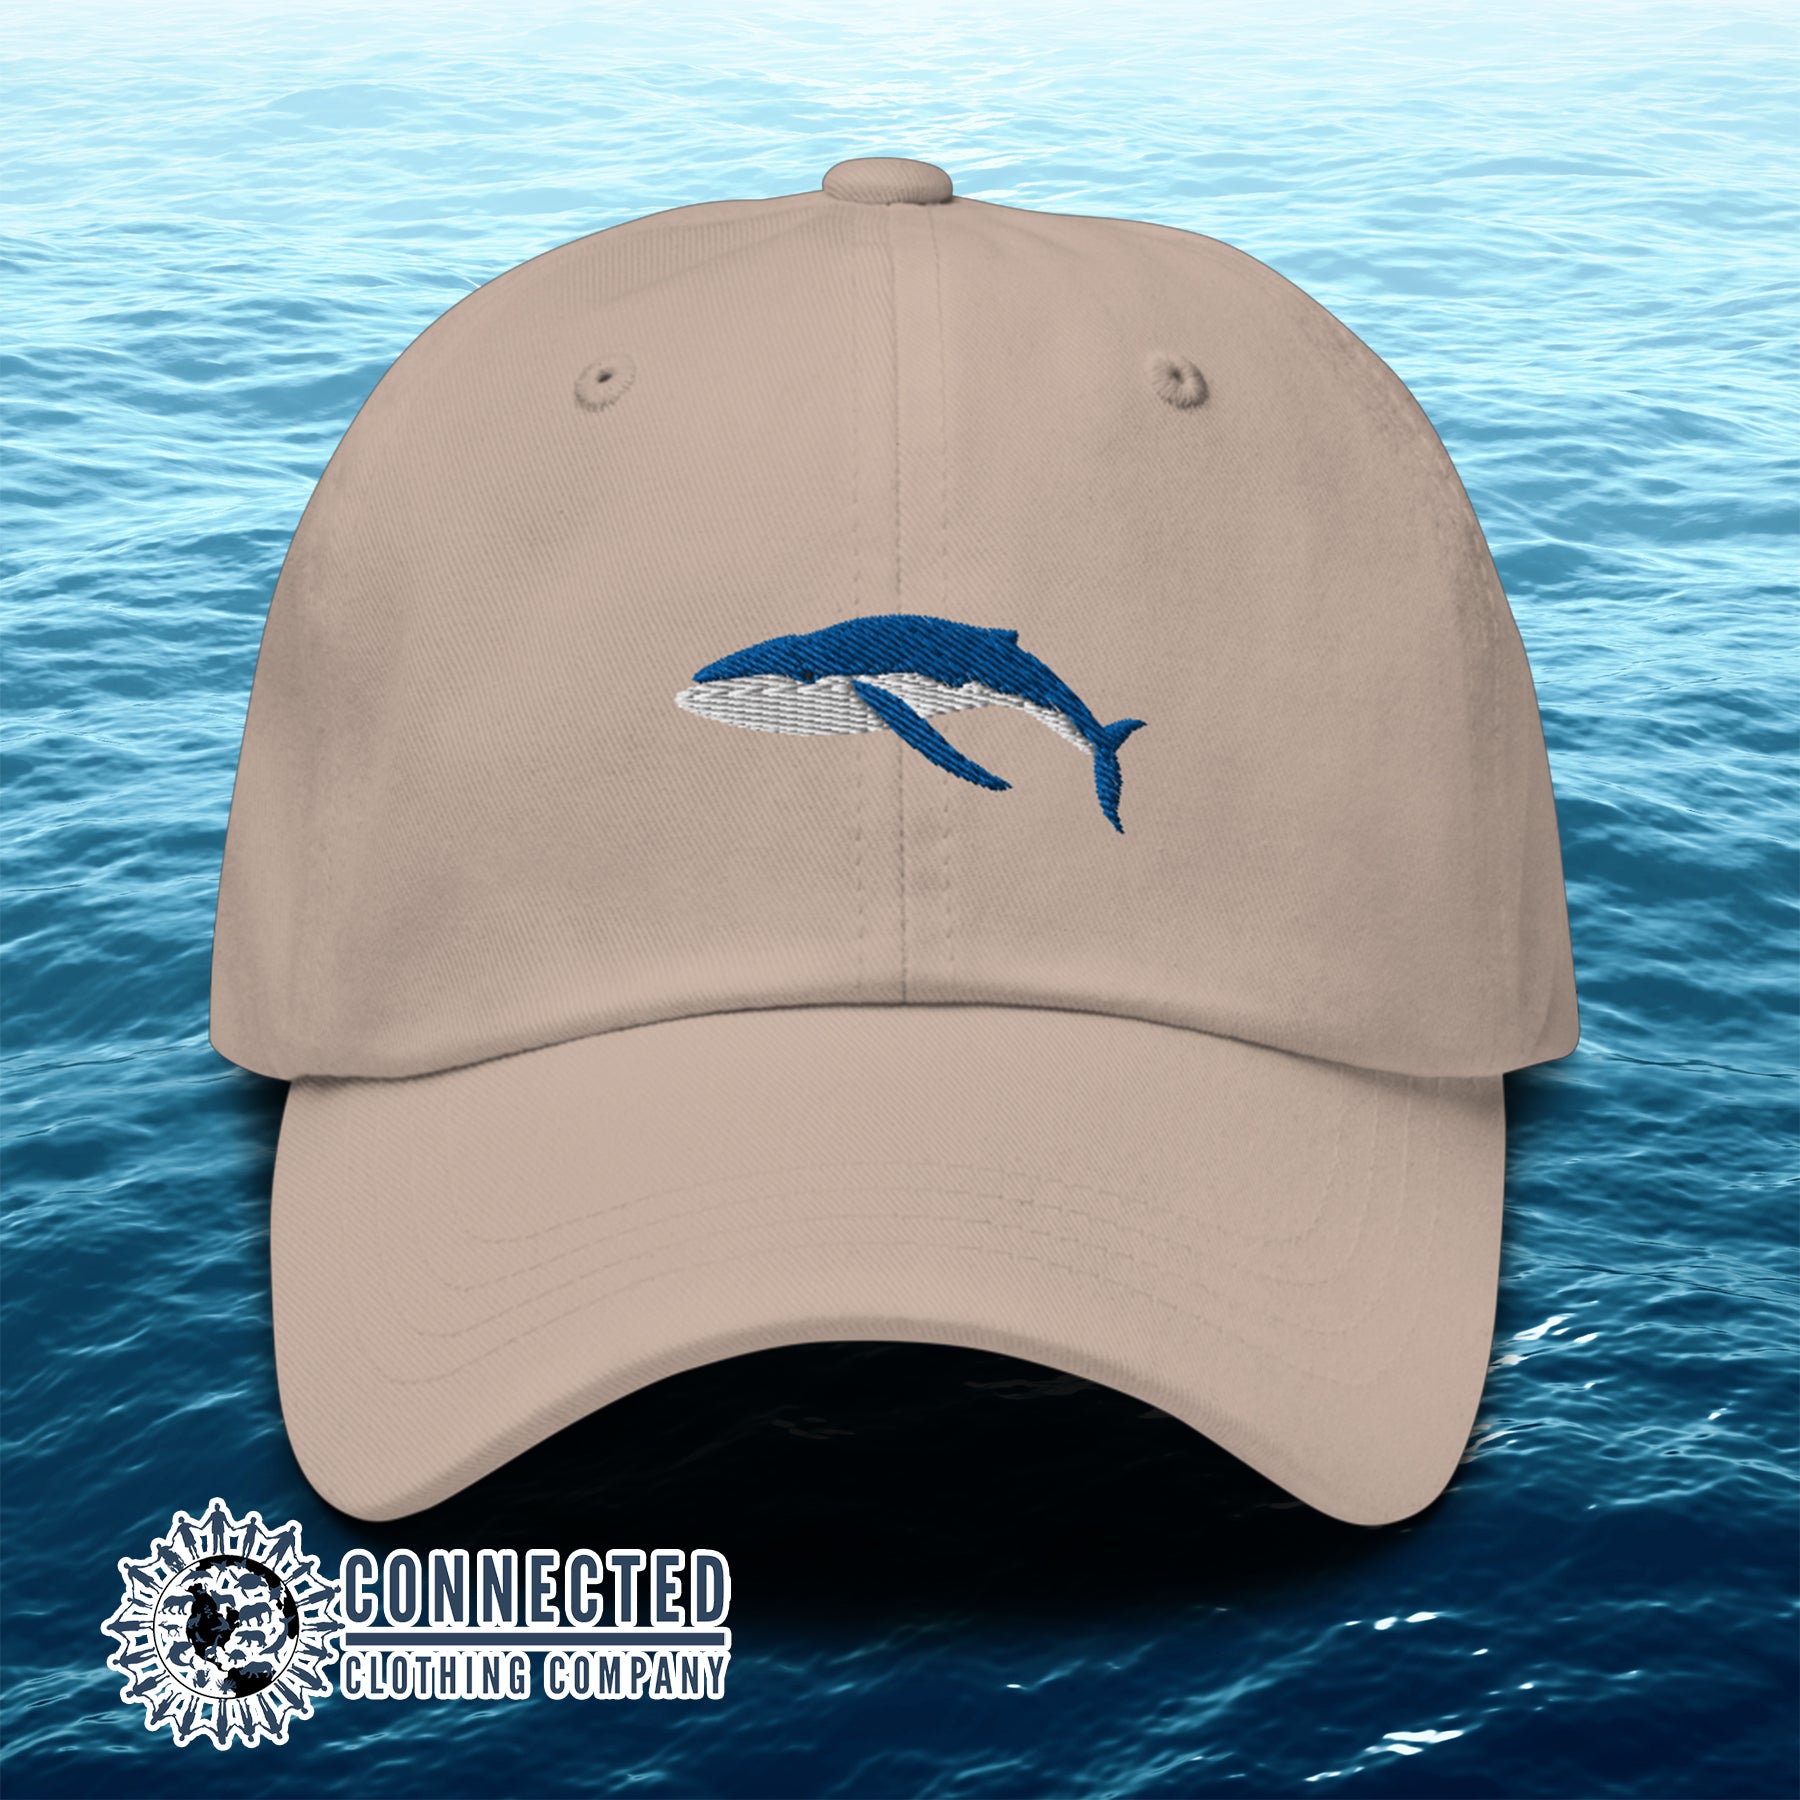 Stone Humpback Whale Cotton Cap - Connected Clothing Company - 10% of profits donated to Mission Blue ocean conservation